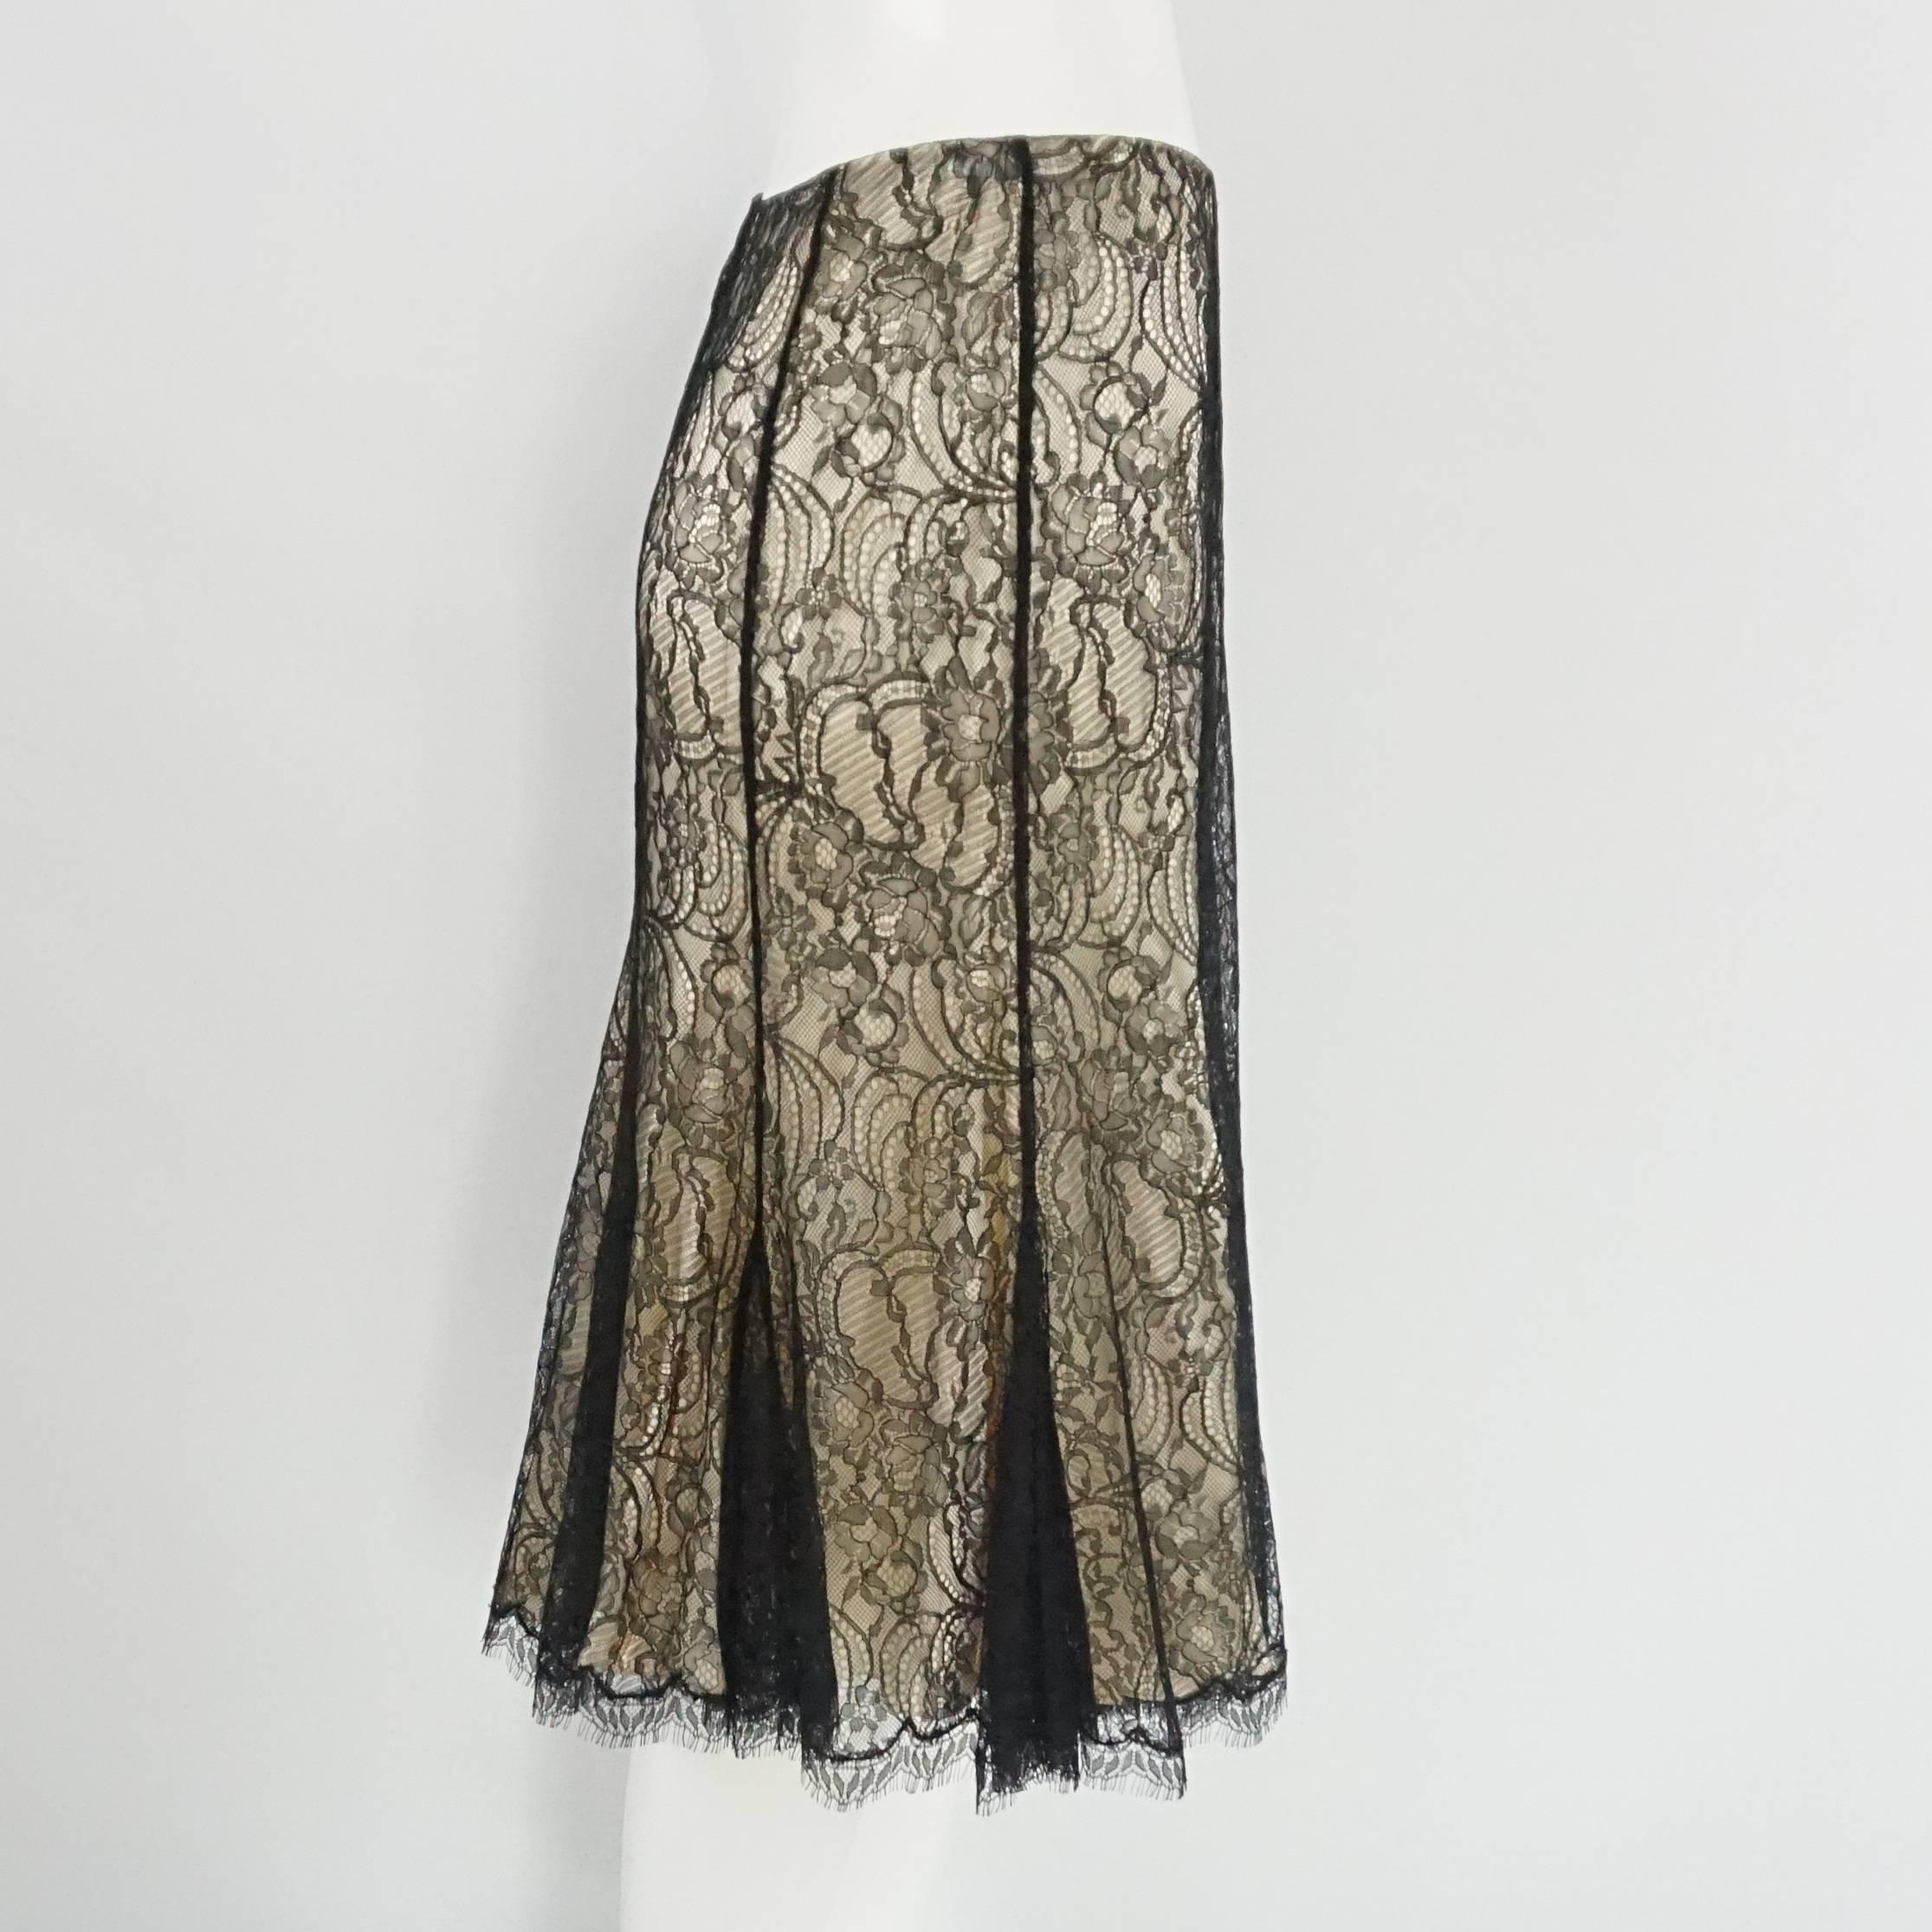 This Ralph Lauren black label skirt has a nude satin shell with a black lace overlay. The skirt zips in the back and also has small pleats on the bottom. The piece is in excellent condition with no visible wear.  Size 10, circa 21st century.